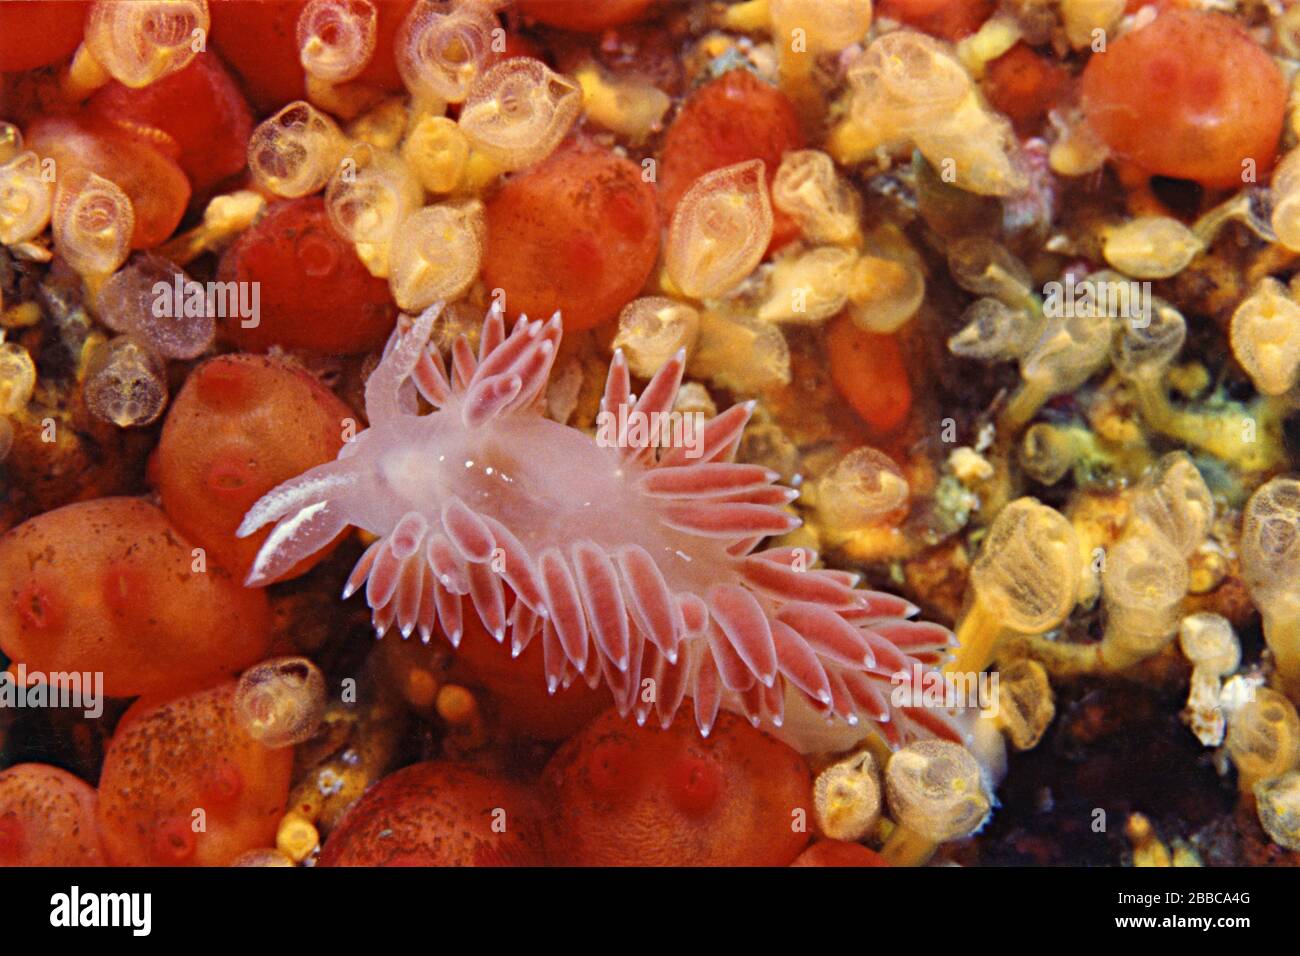 Red-gilled aeolid nudibranch (Flabellina verrucosa), Queen Charlotte Strait, BC Stock Photo